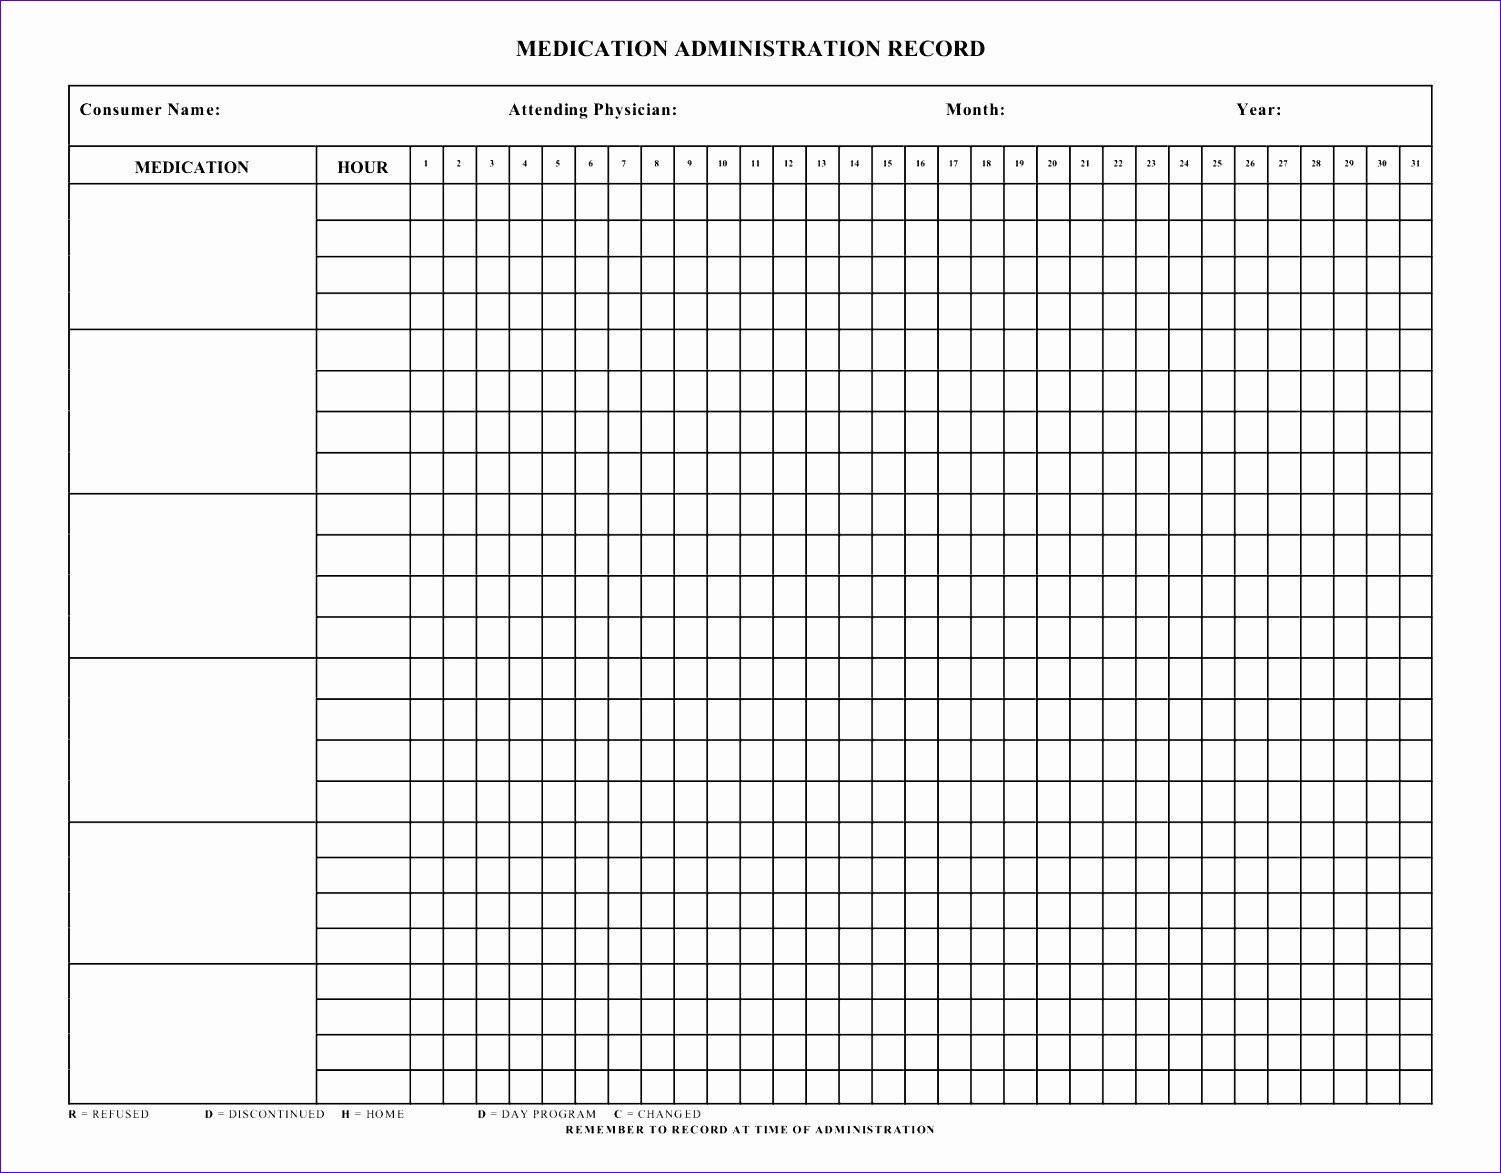 Medication Administration Record Template Excel 6 Swim Lane Diagram Template Excel Exceltemplates